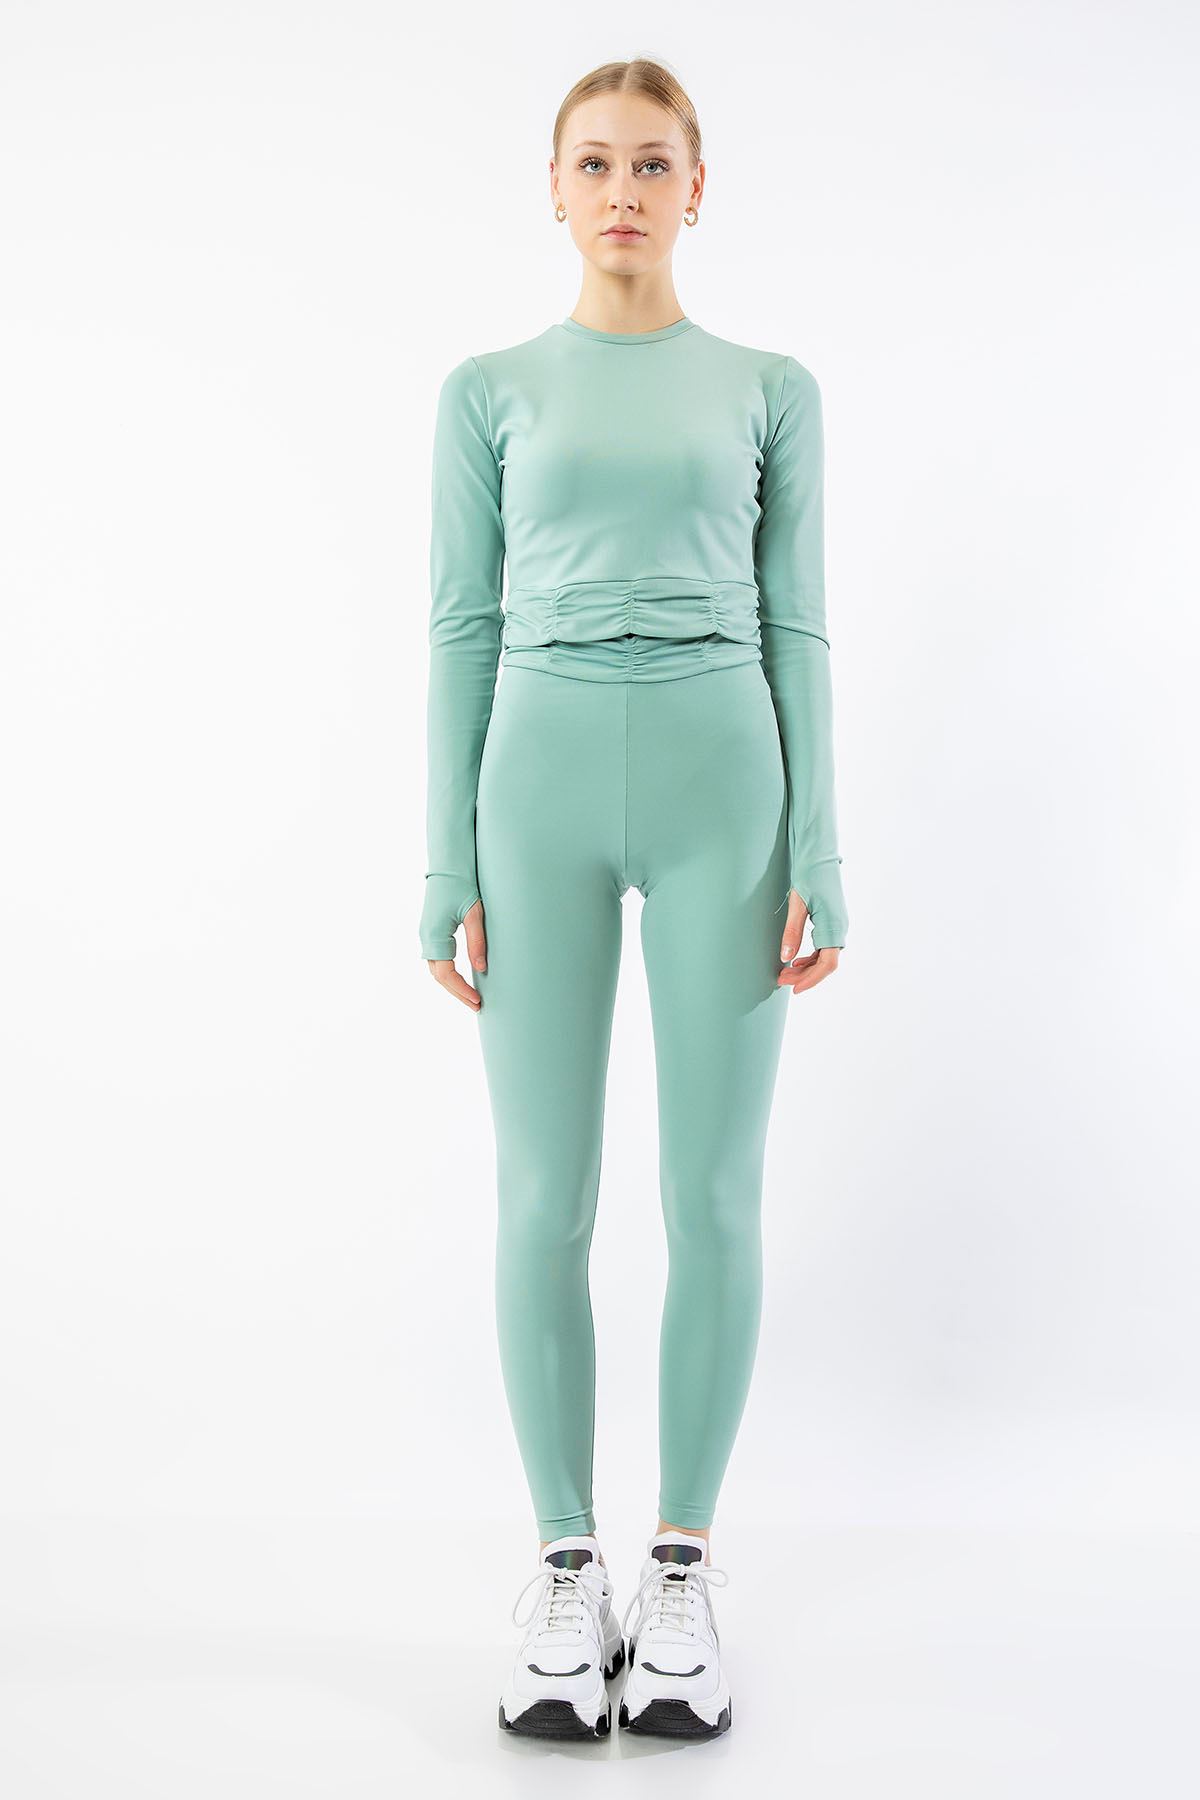 Scuba Fabric Long Shirred Women Tights Collection - Mint